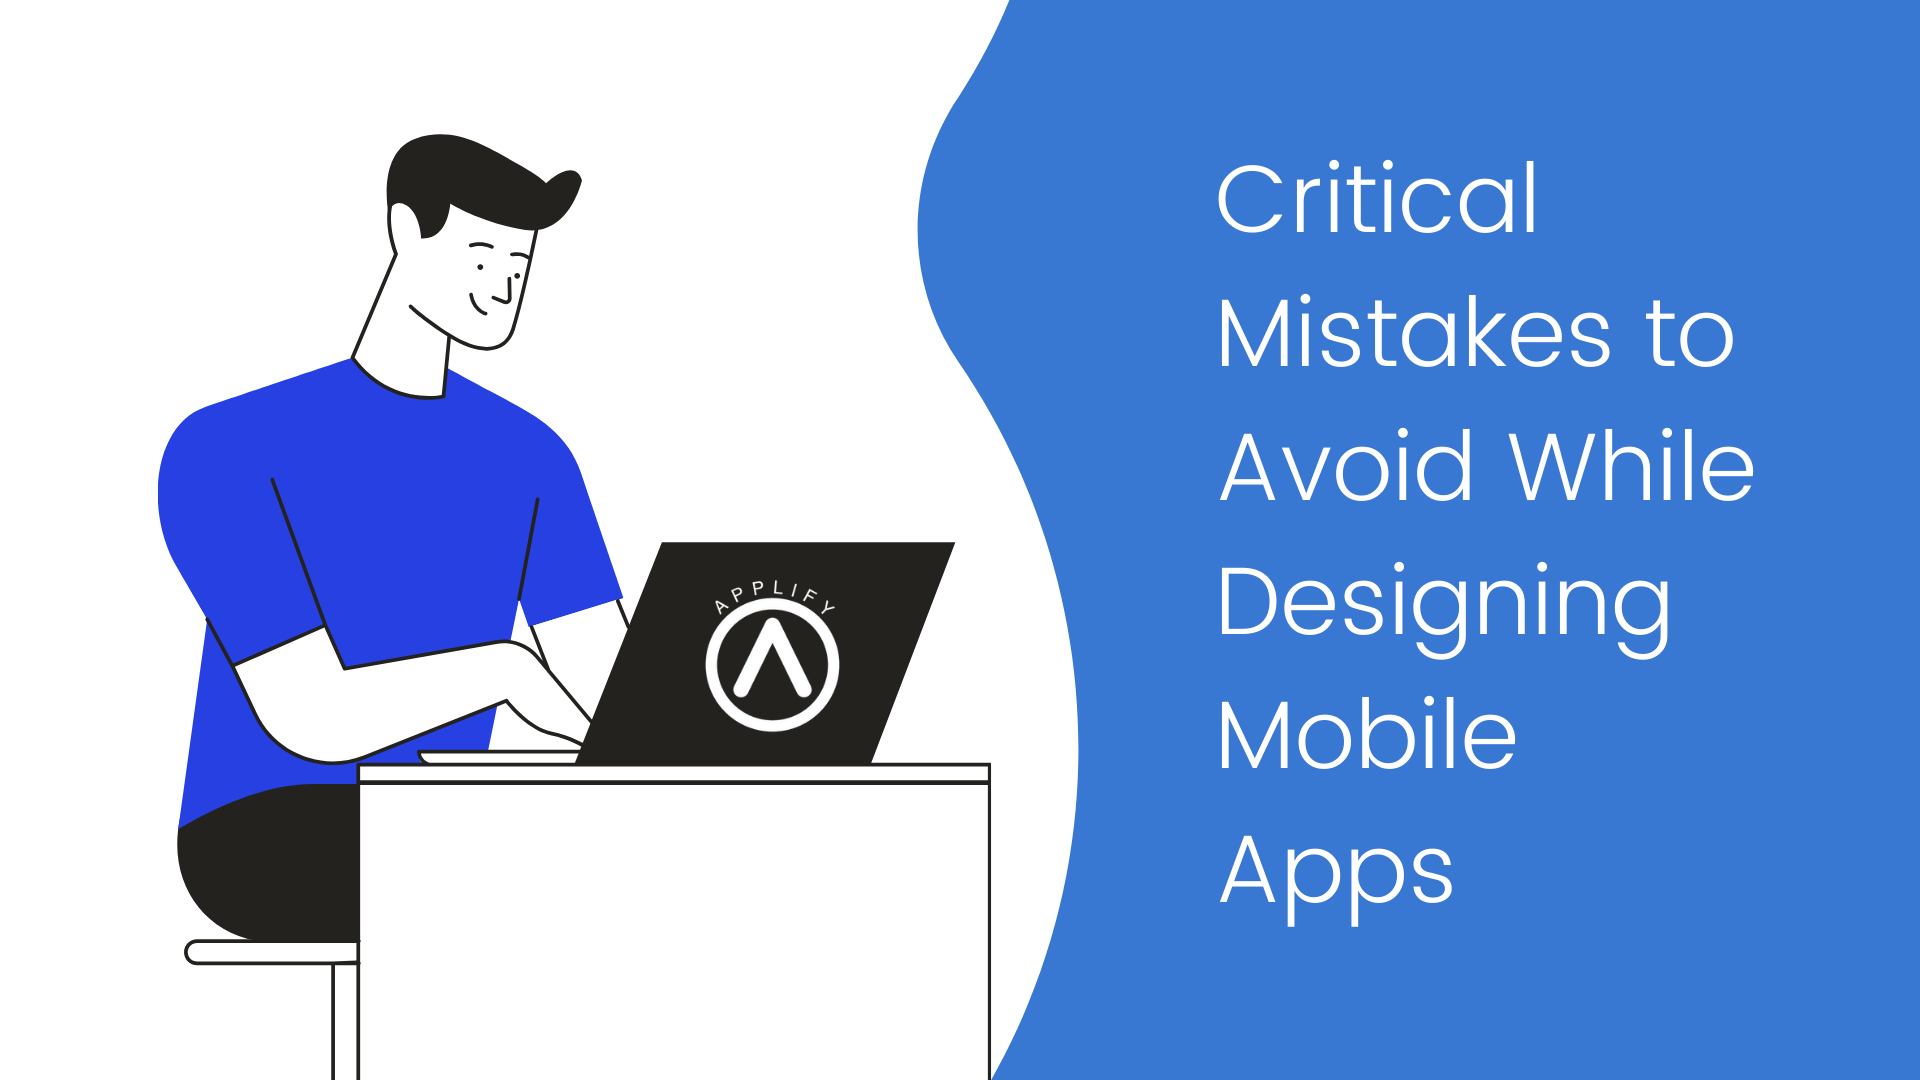 Critical Mistakes to Avoid While Designing Mobile Apps